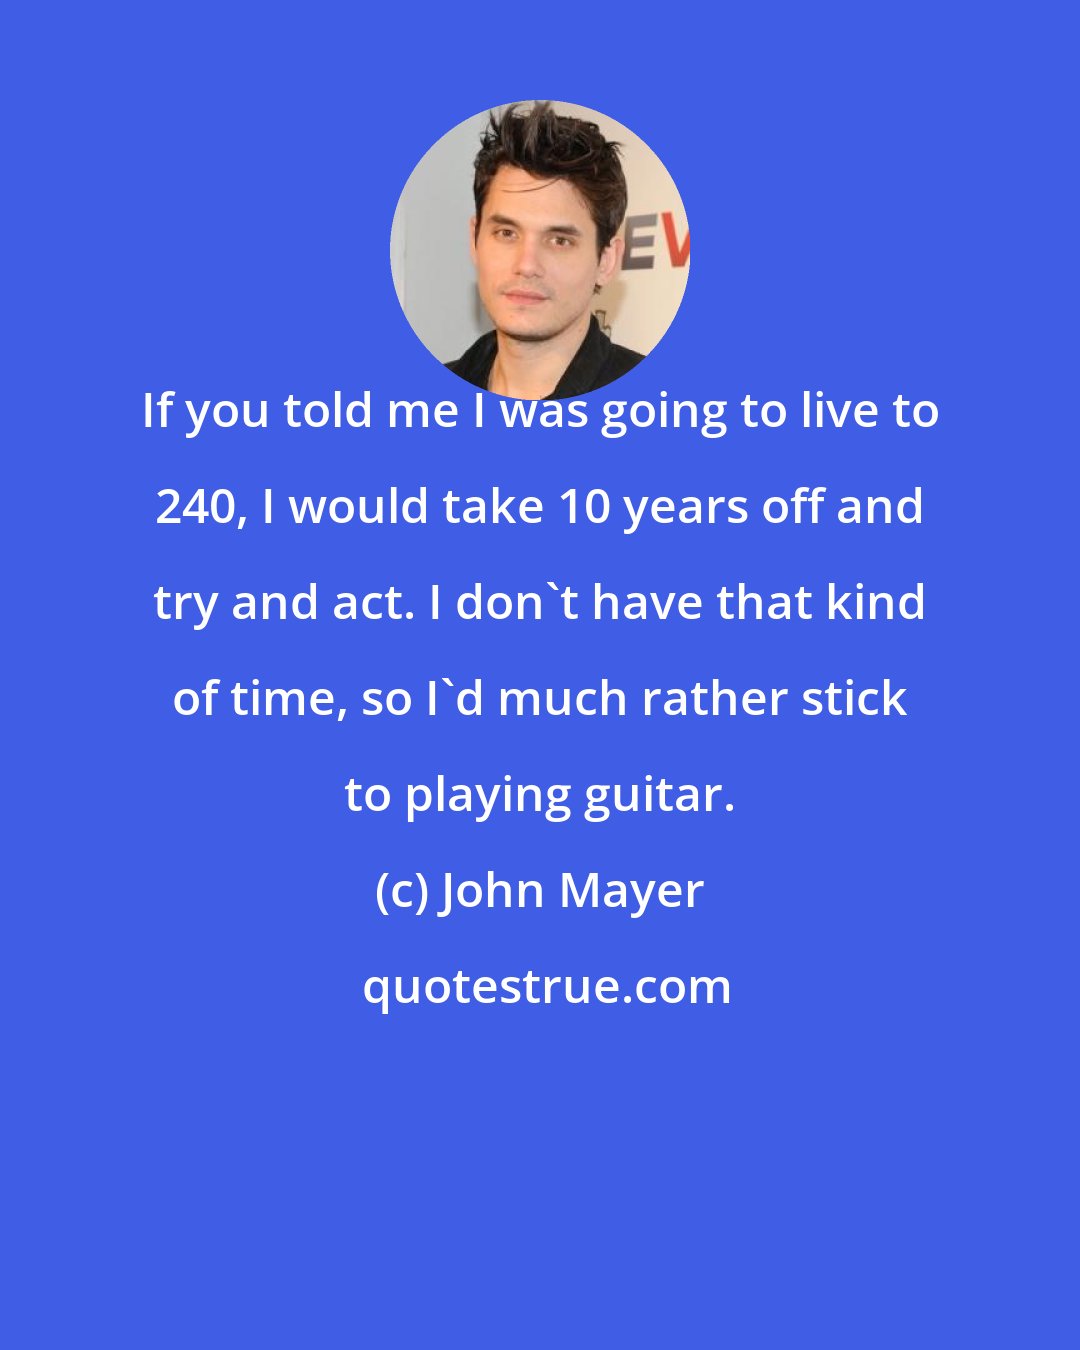 John Mayer: If you told me I was going to live to 240, I would take 10 years off and try and act. I don't have that kind of time, so I'd much rather stick to playing guitar.